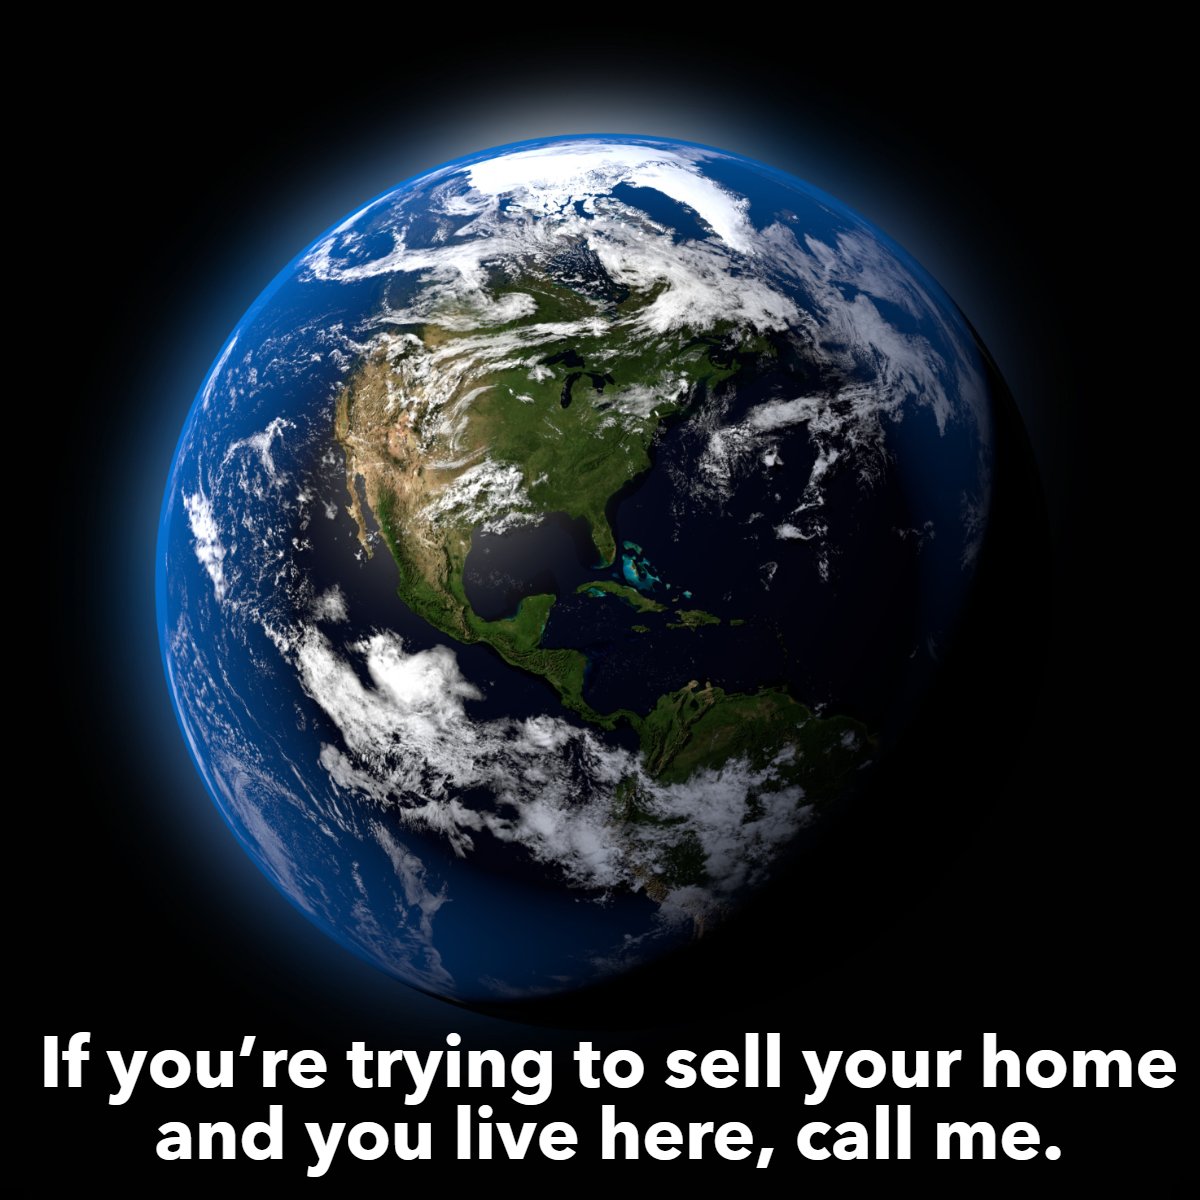 Are you trying to sell your home? 

Feel free to reach out!

#HomeForSale #RealEstate #DreamHome #HouseHunting